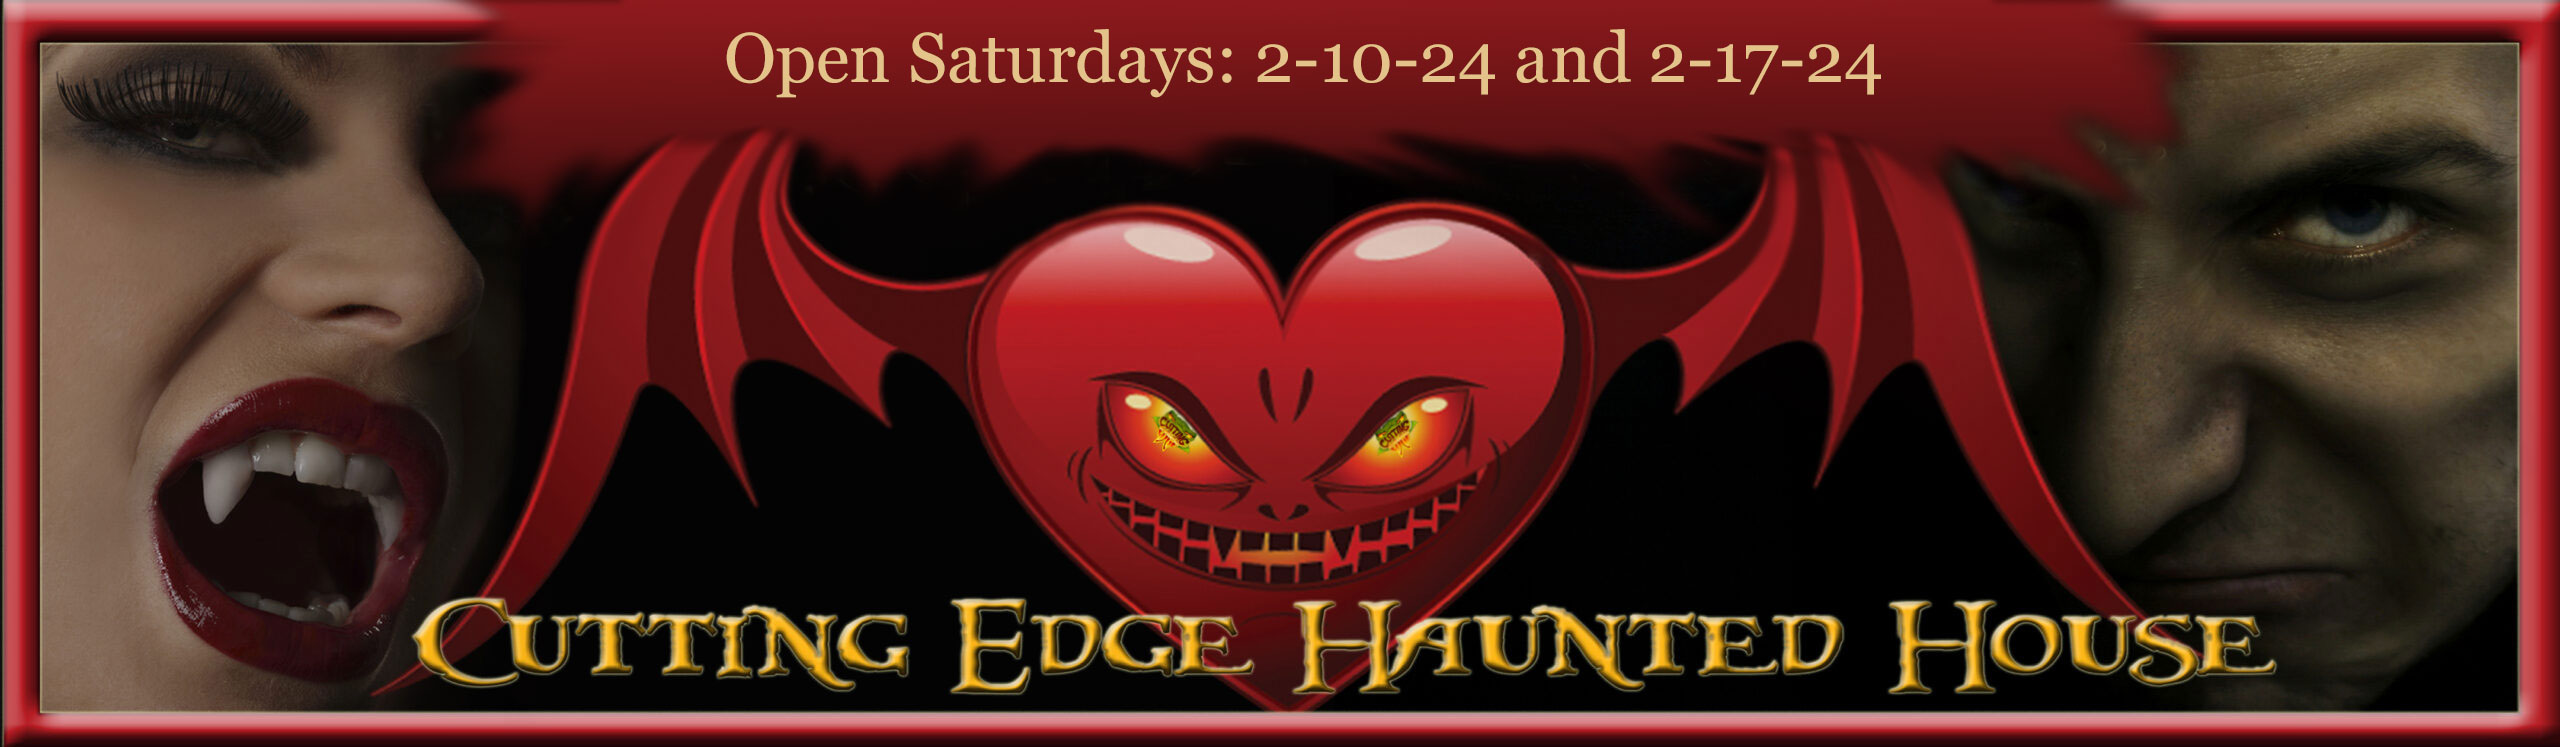 Our friends at Cutting Edge Haunted House Open Saturday 2/10/24 and Saturday 2/17/24!